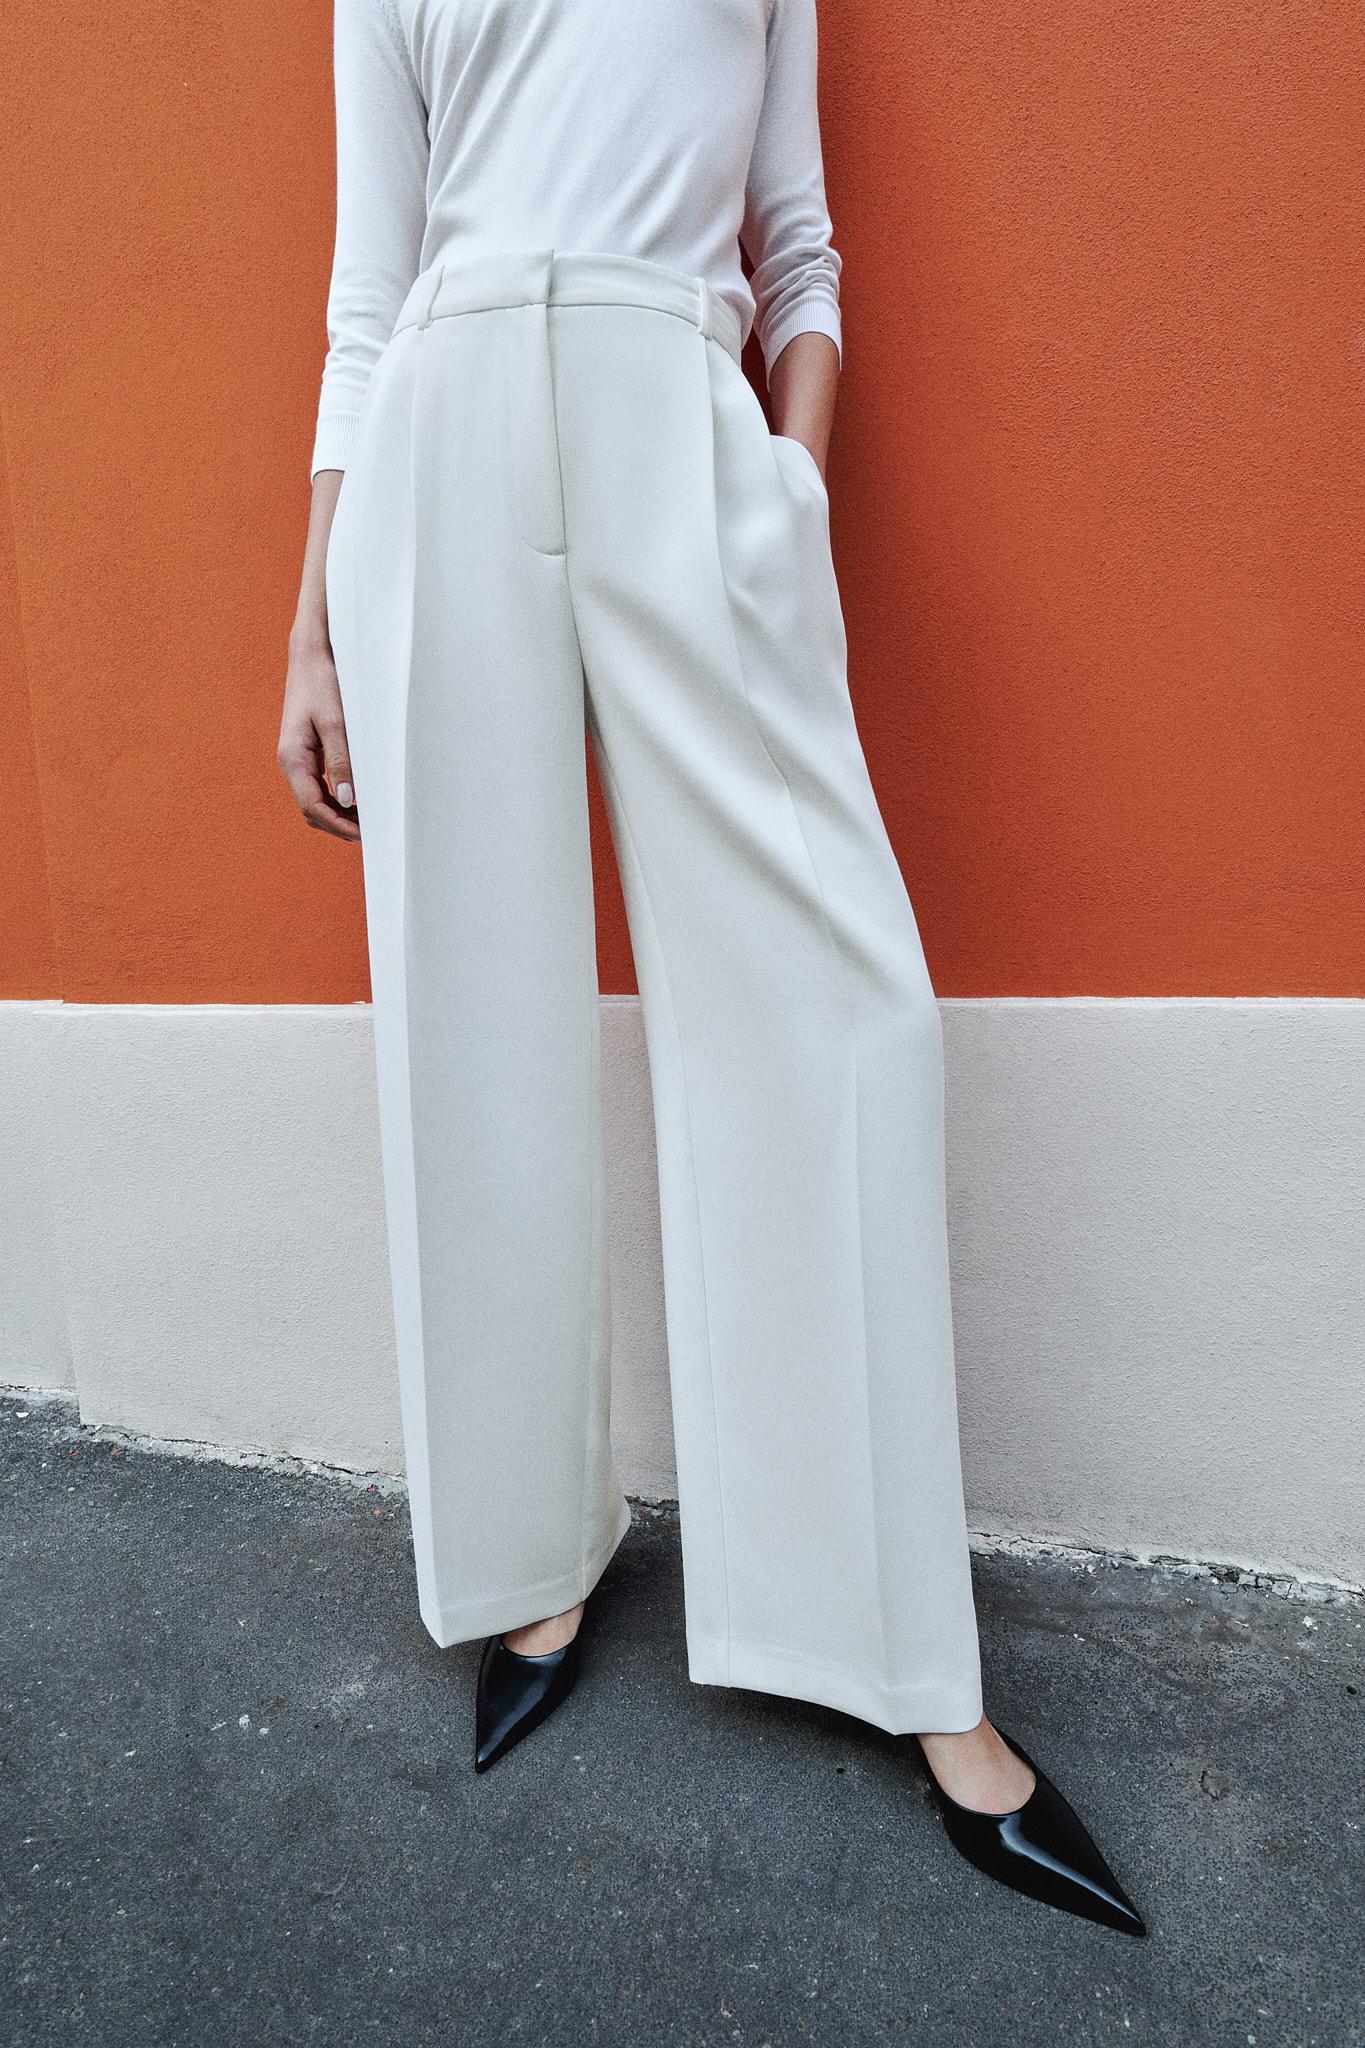 Zara, Pants & Jumpsuits, Nwt Zara High Waisted Wide Leg Pants In Oyster  White